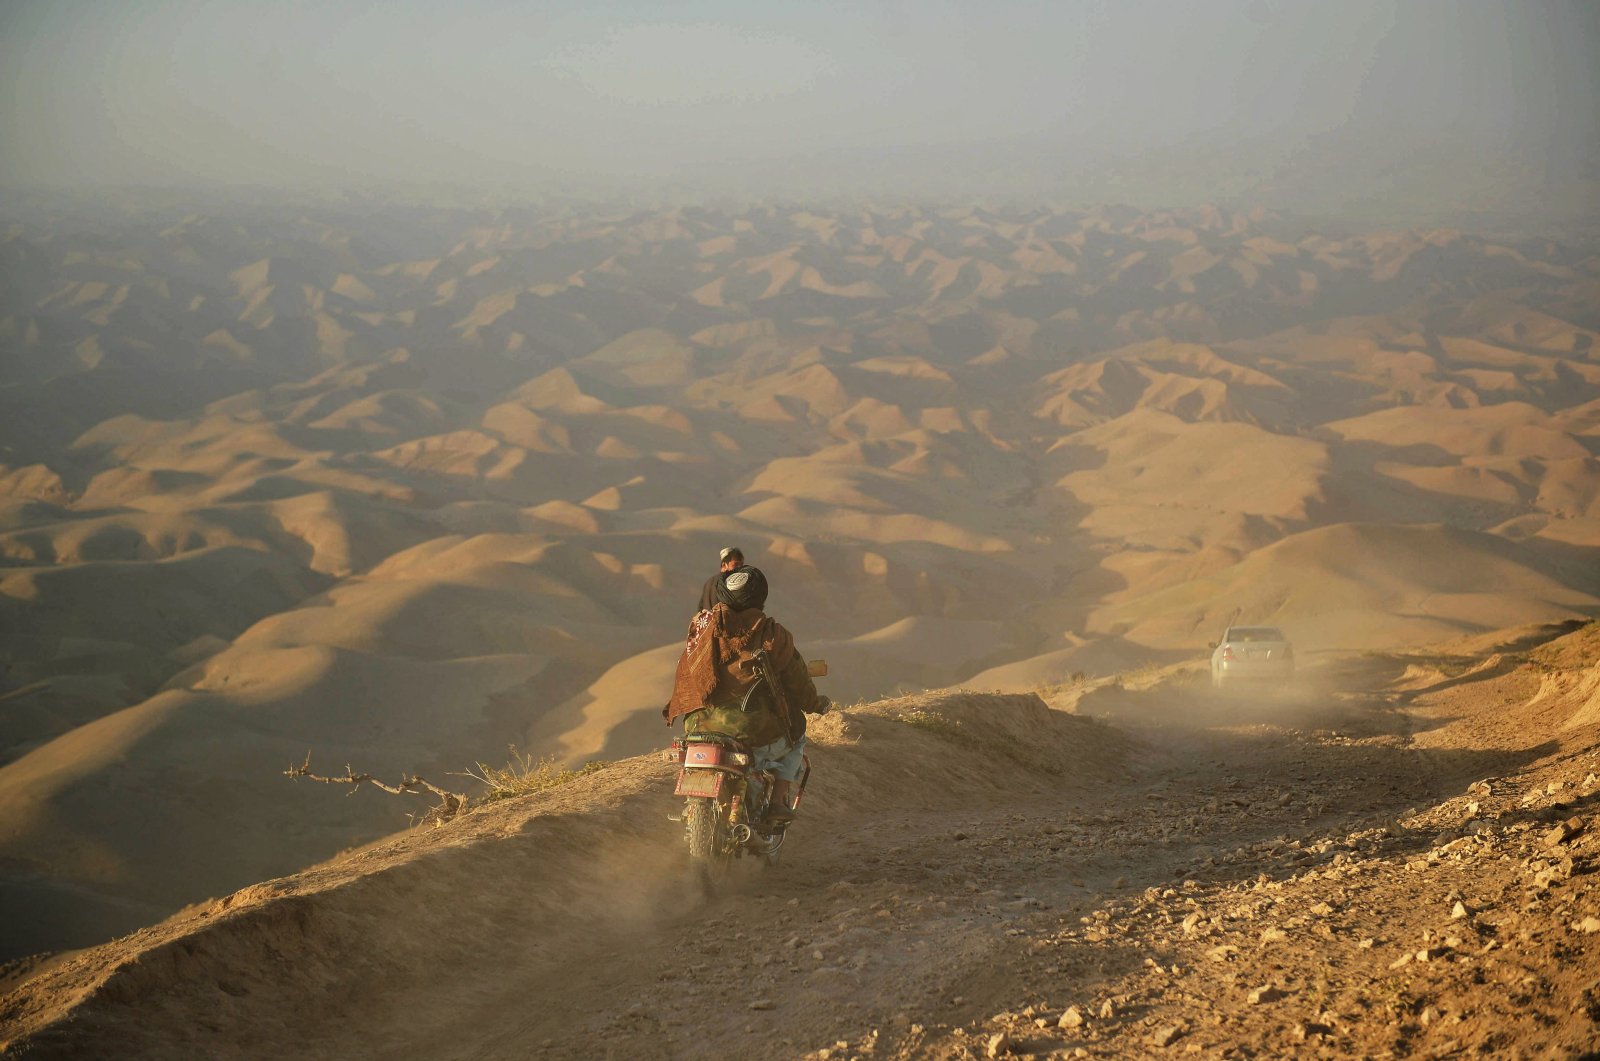 A Taliban member rides his motorbike on a hill in the Morghab district of Badghis province, Afghanistan, Oct. 15, 2021 (AFP Photo)